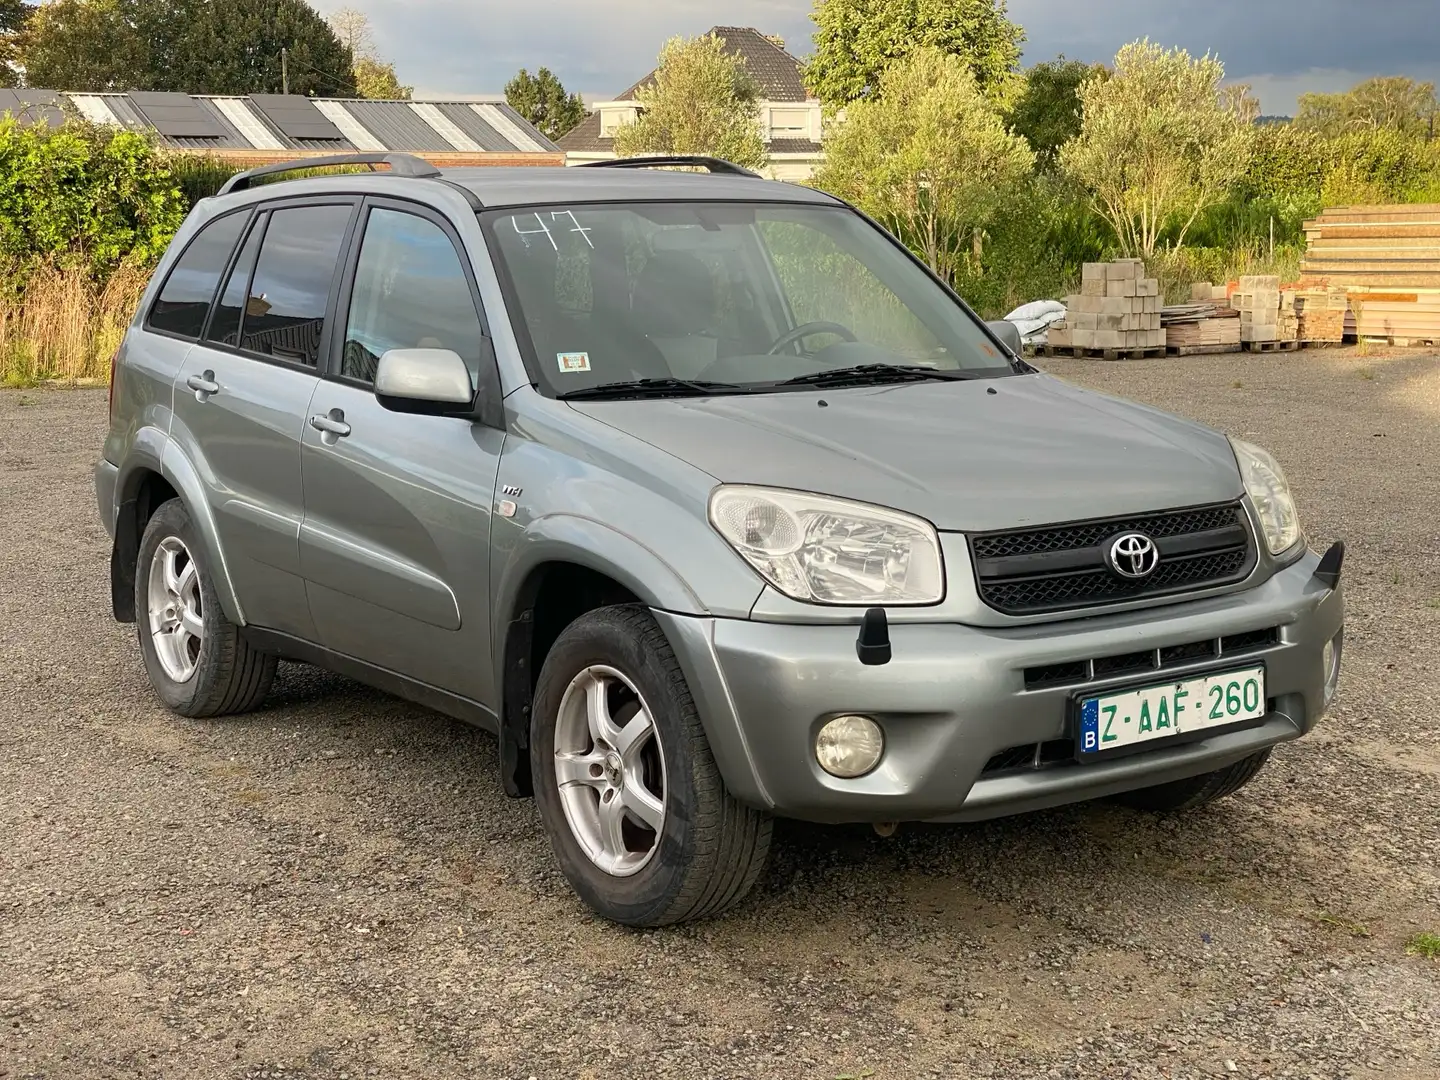 Toyota RAV 4 SUV4x4  Essence Climatise only to Africa Grigio - 2